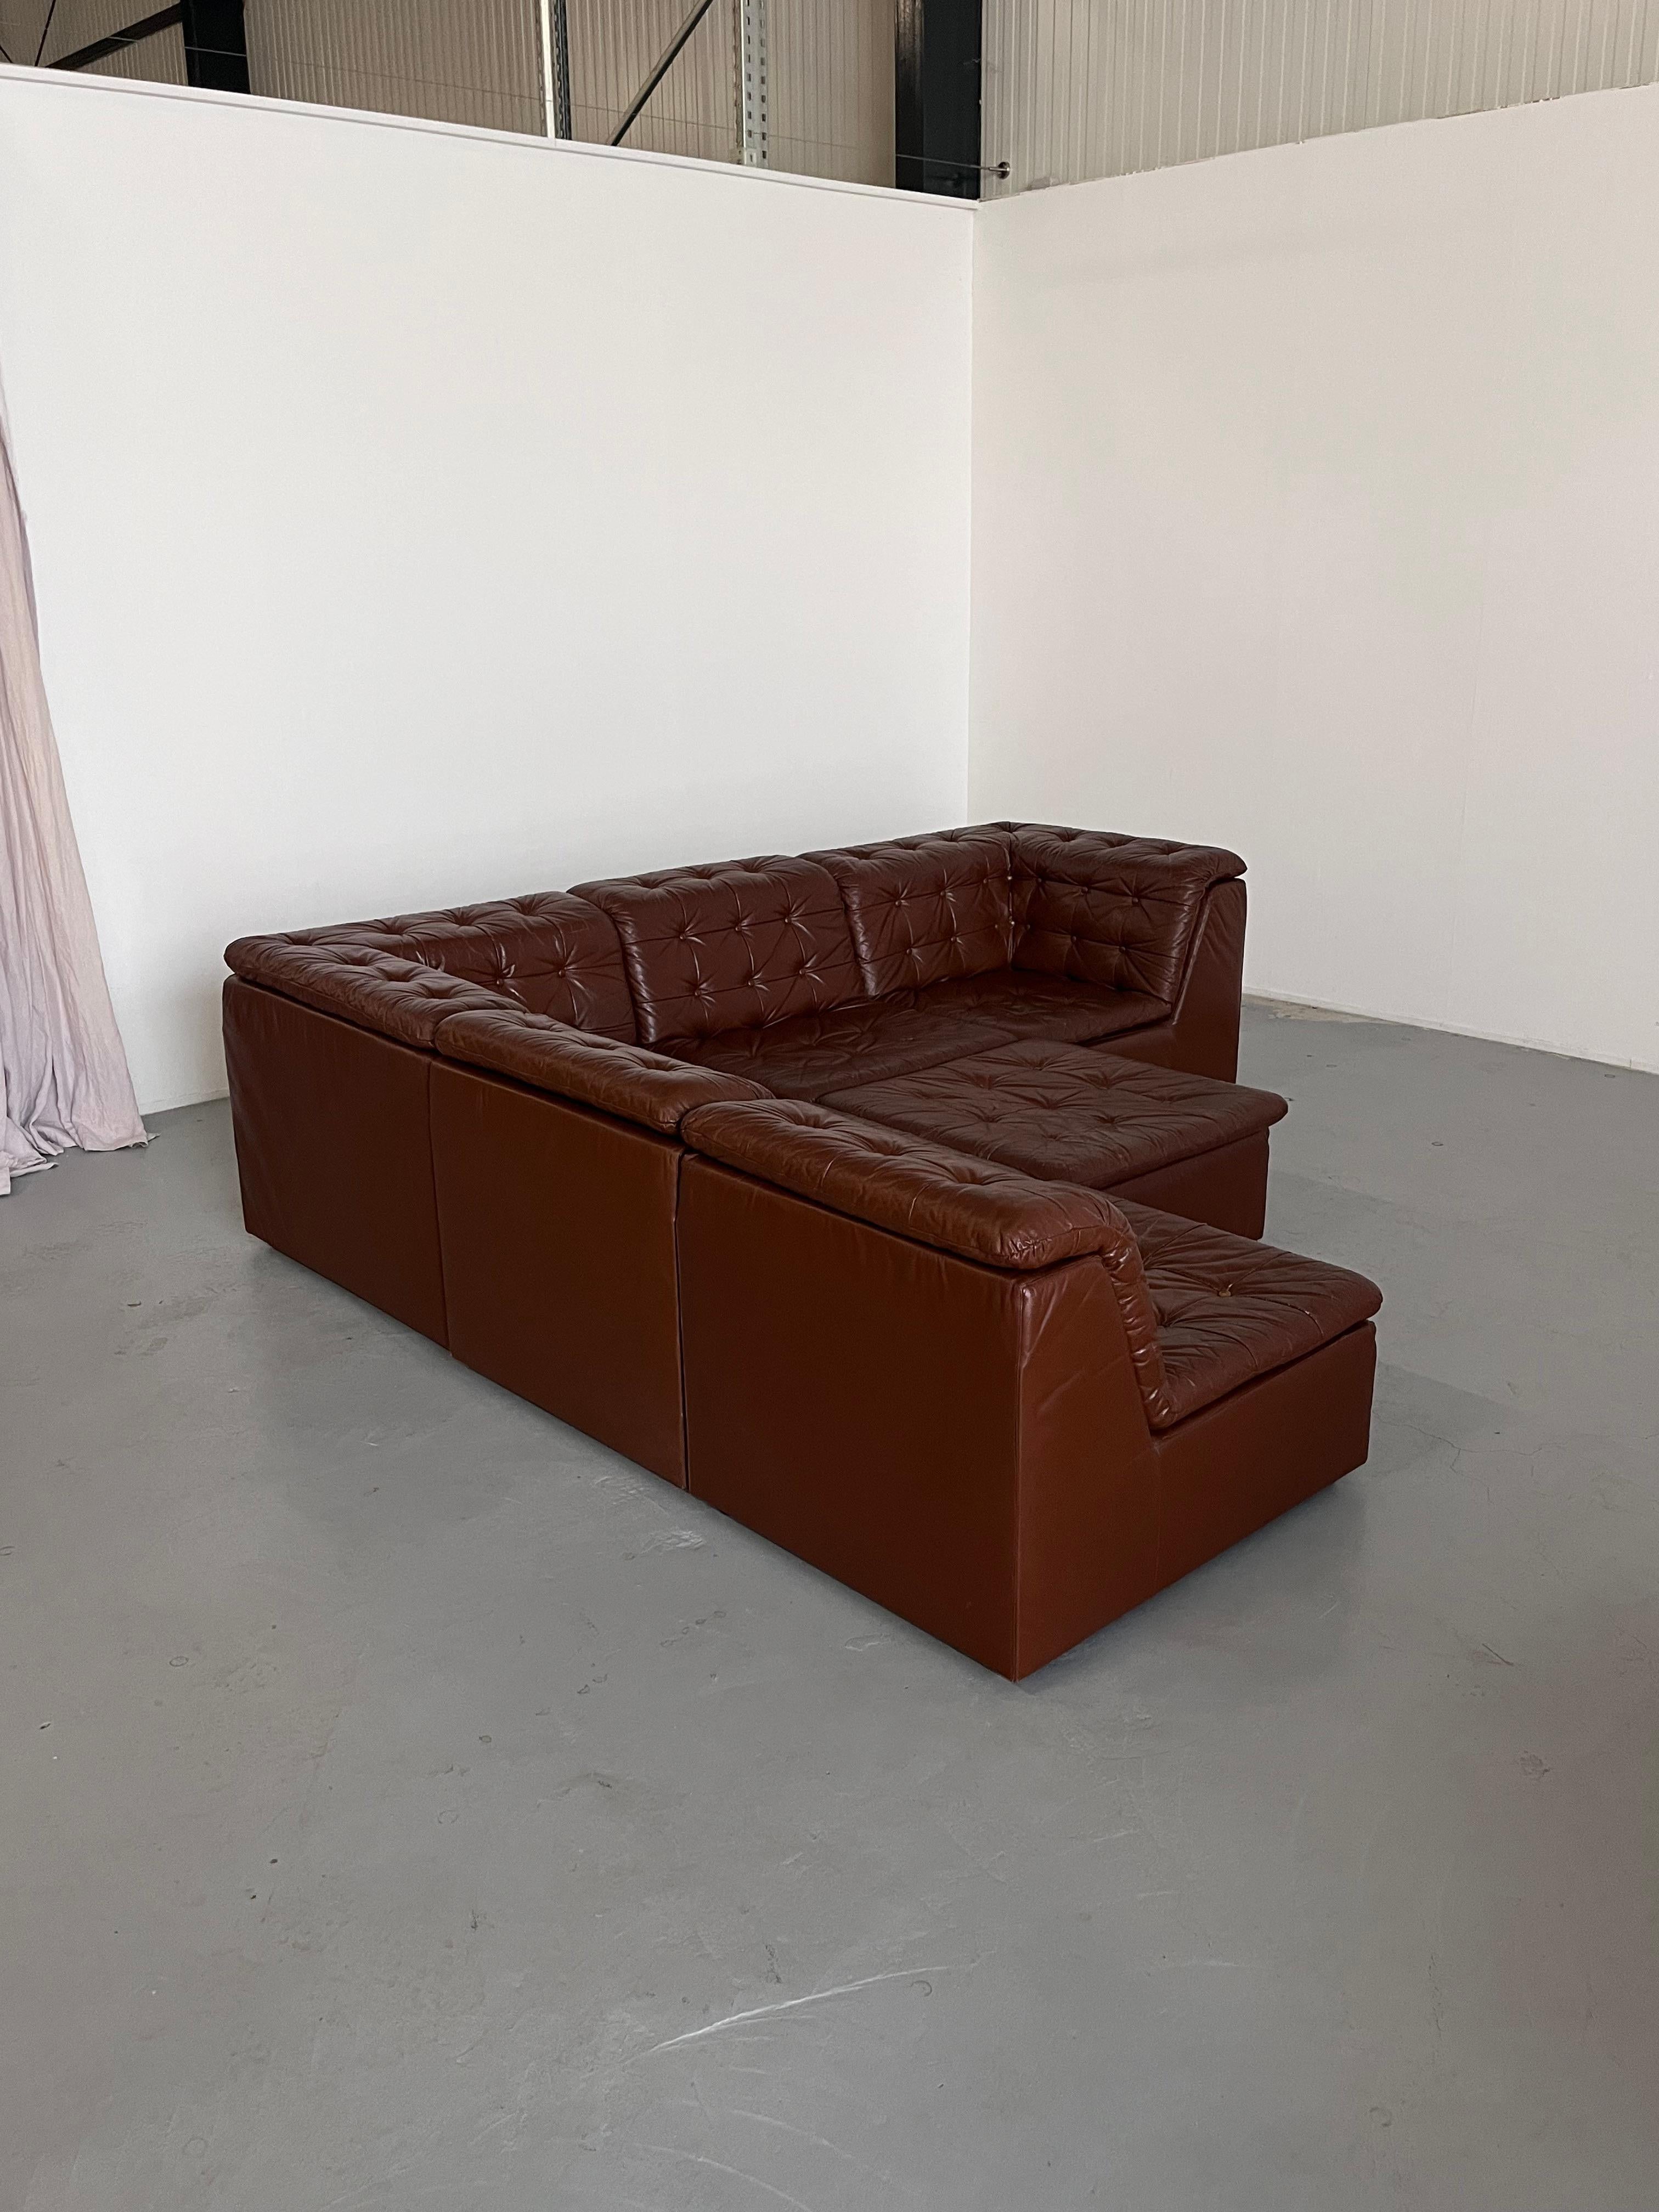 Vintage Patchwork Cognac Leather Six-Part Modular Sofa by Laauser, 1970s Germany For Sale 2